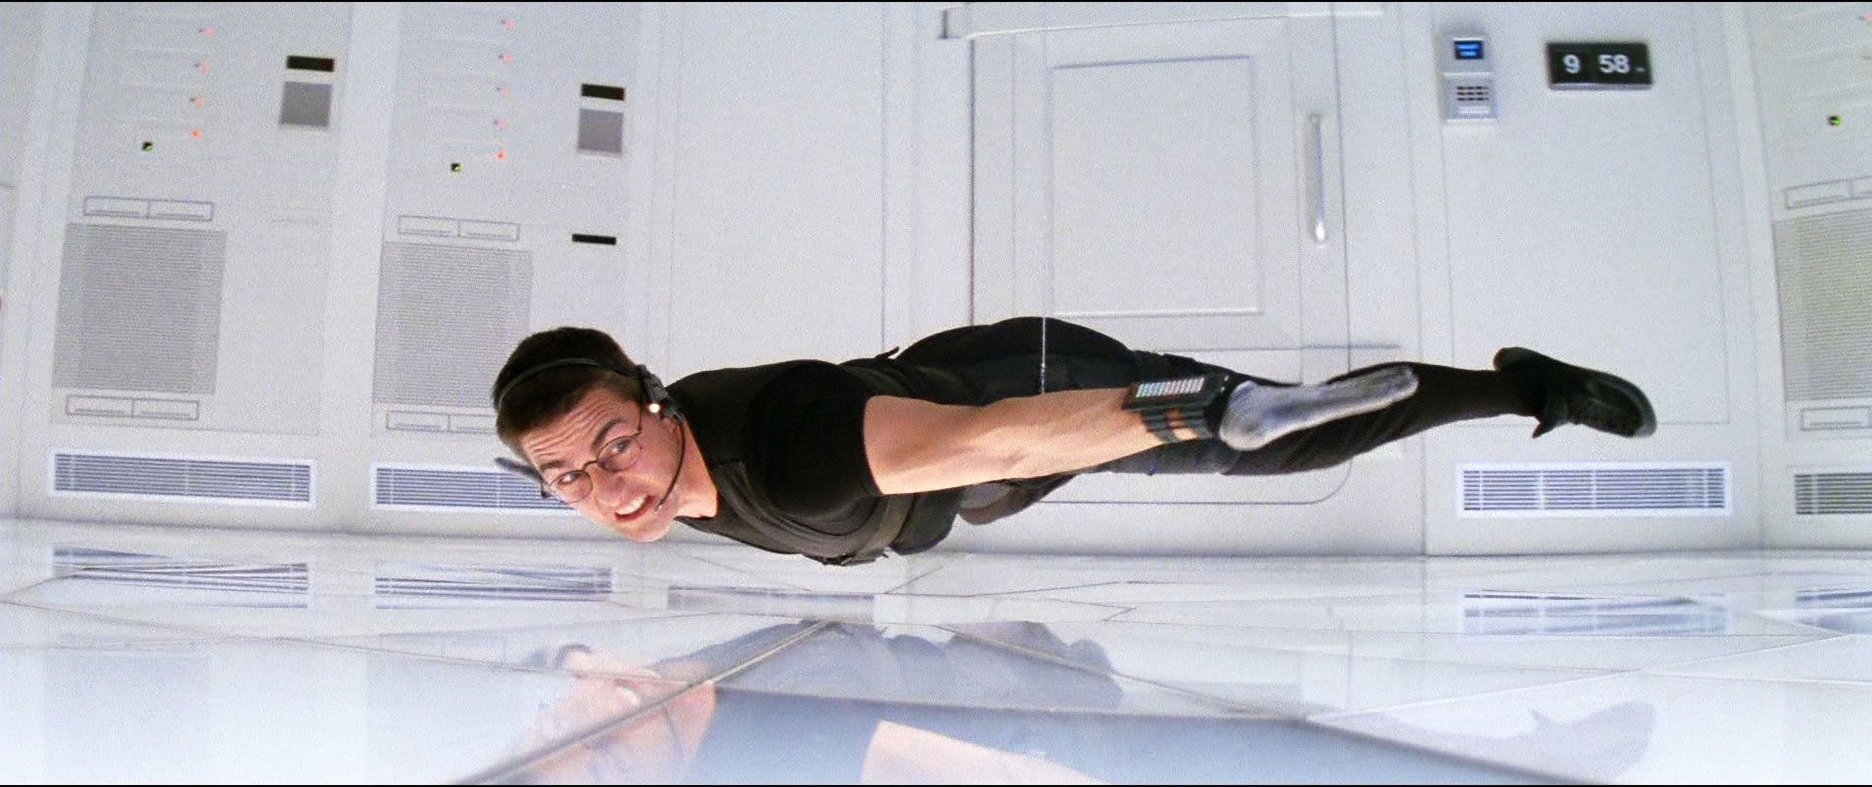 Mission Impossible Featured